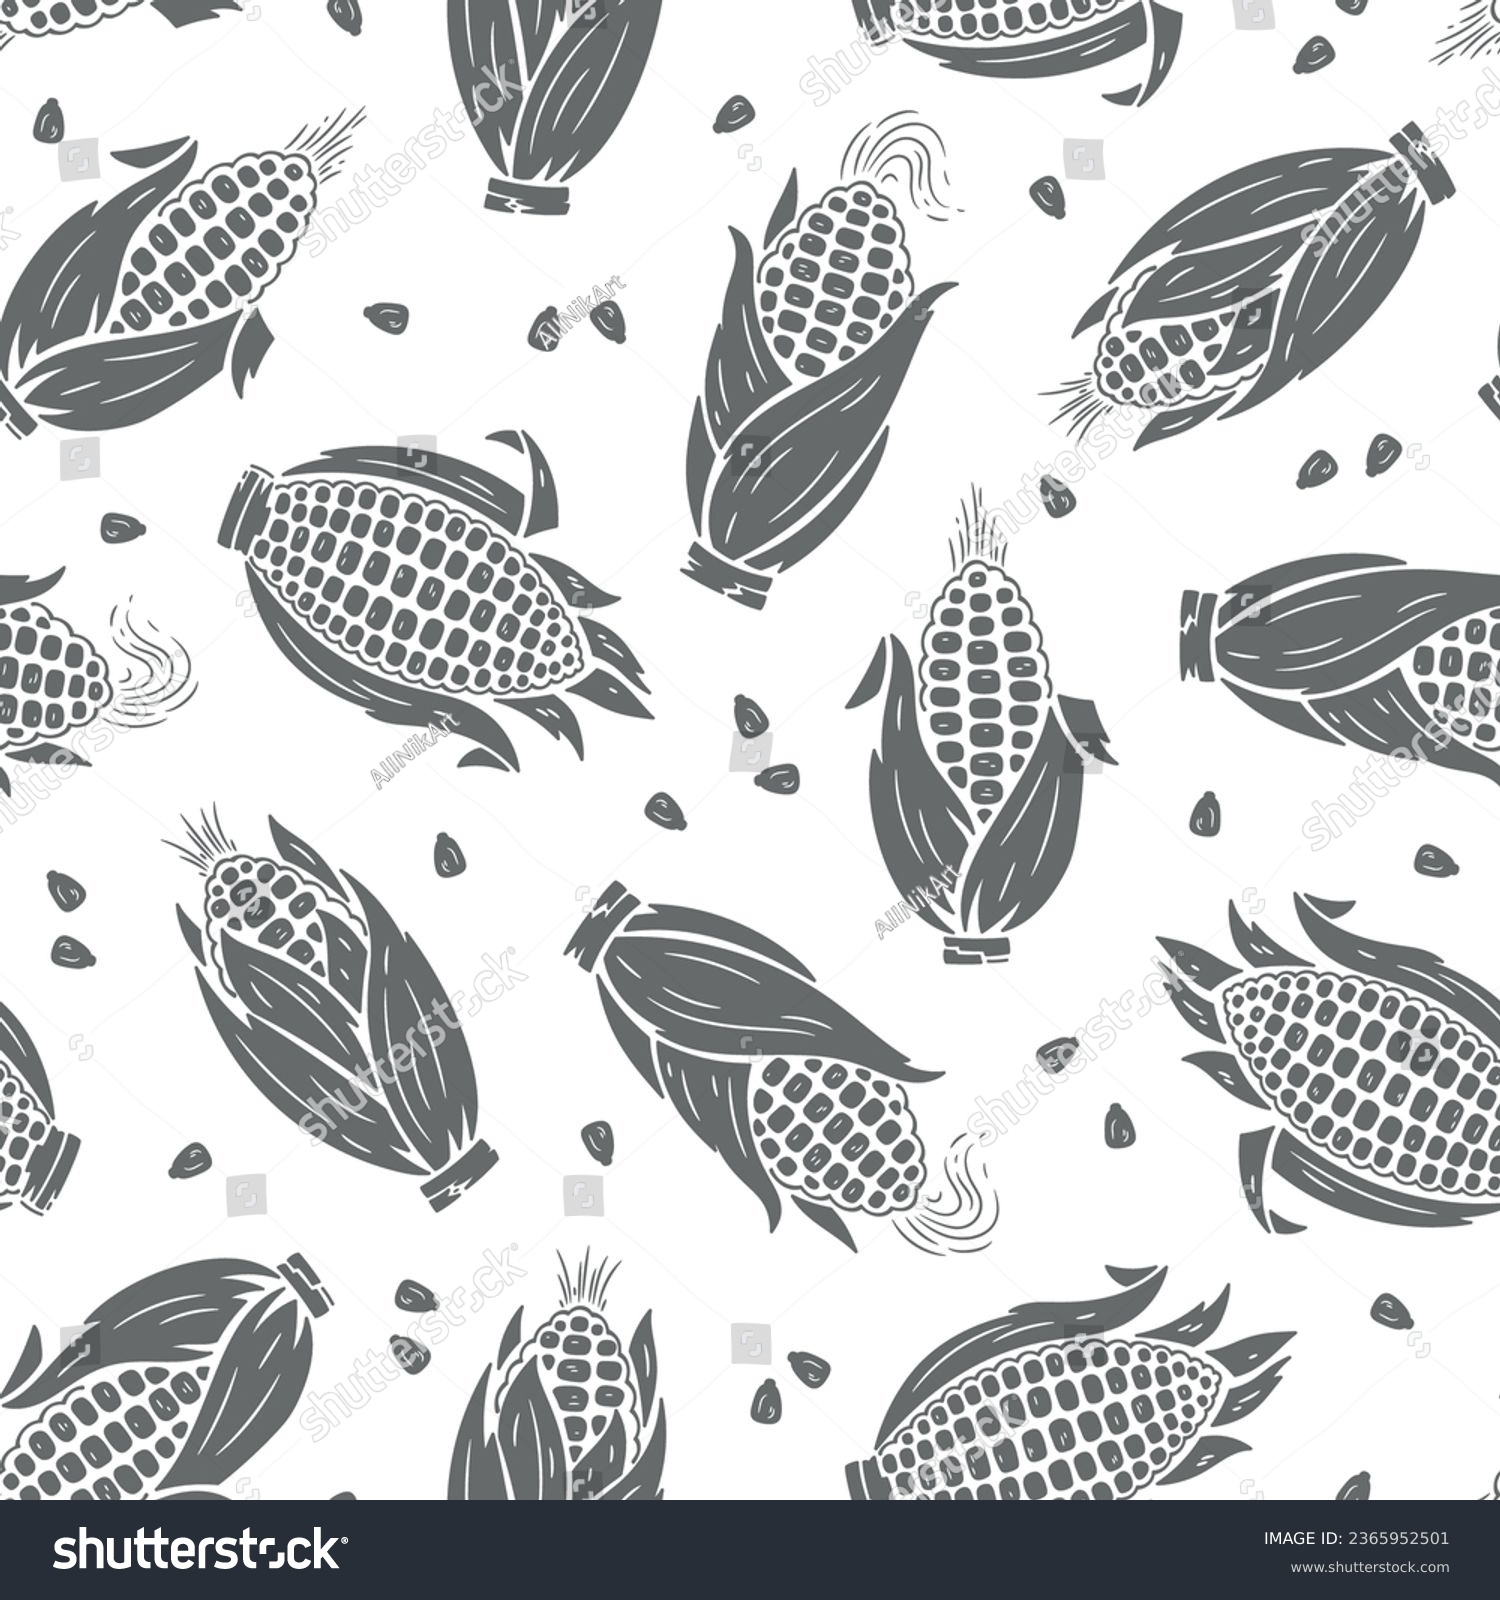 Corn Cobs Seamless Pattern. Maize Black and White Background. Vegetables Vector illustration #2365952501